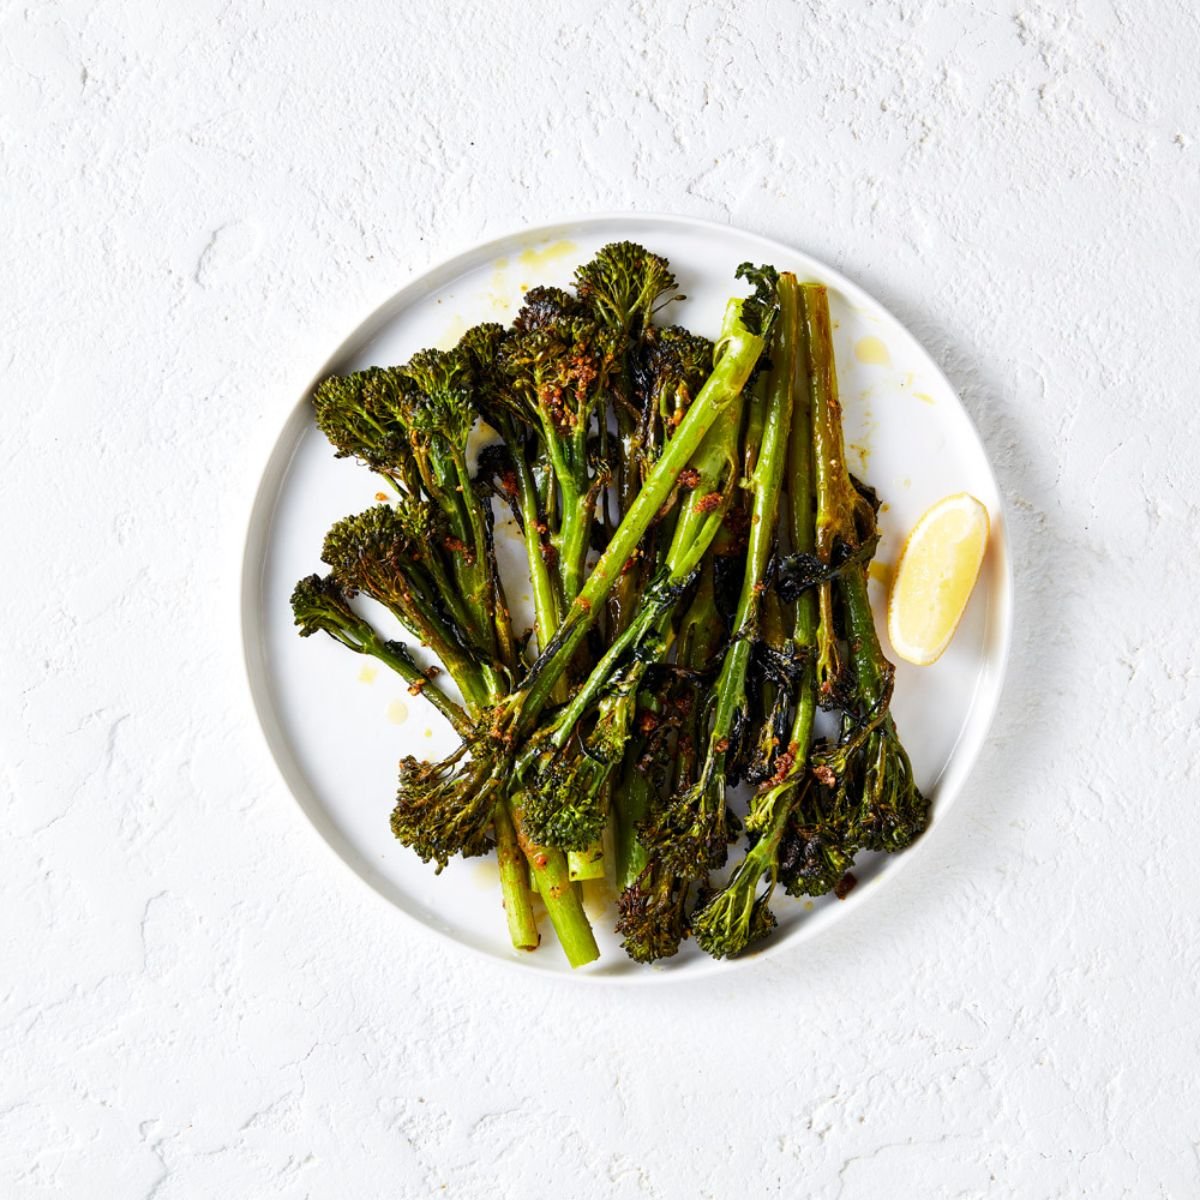 Roasted broccolini in a white plate.